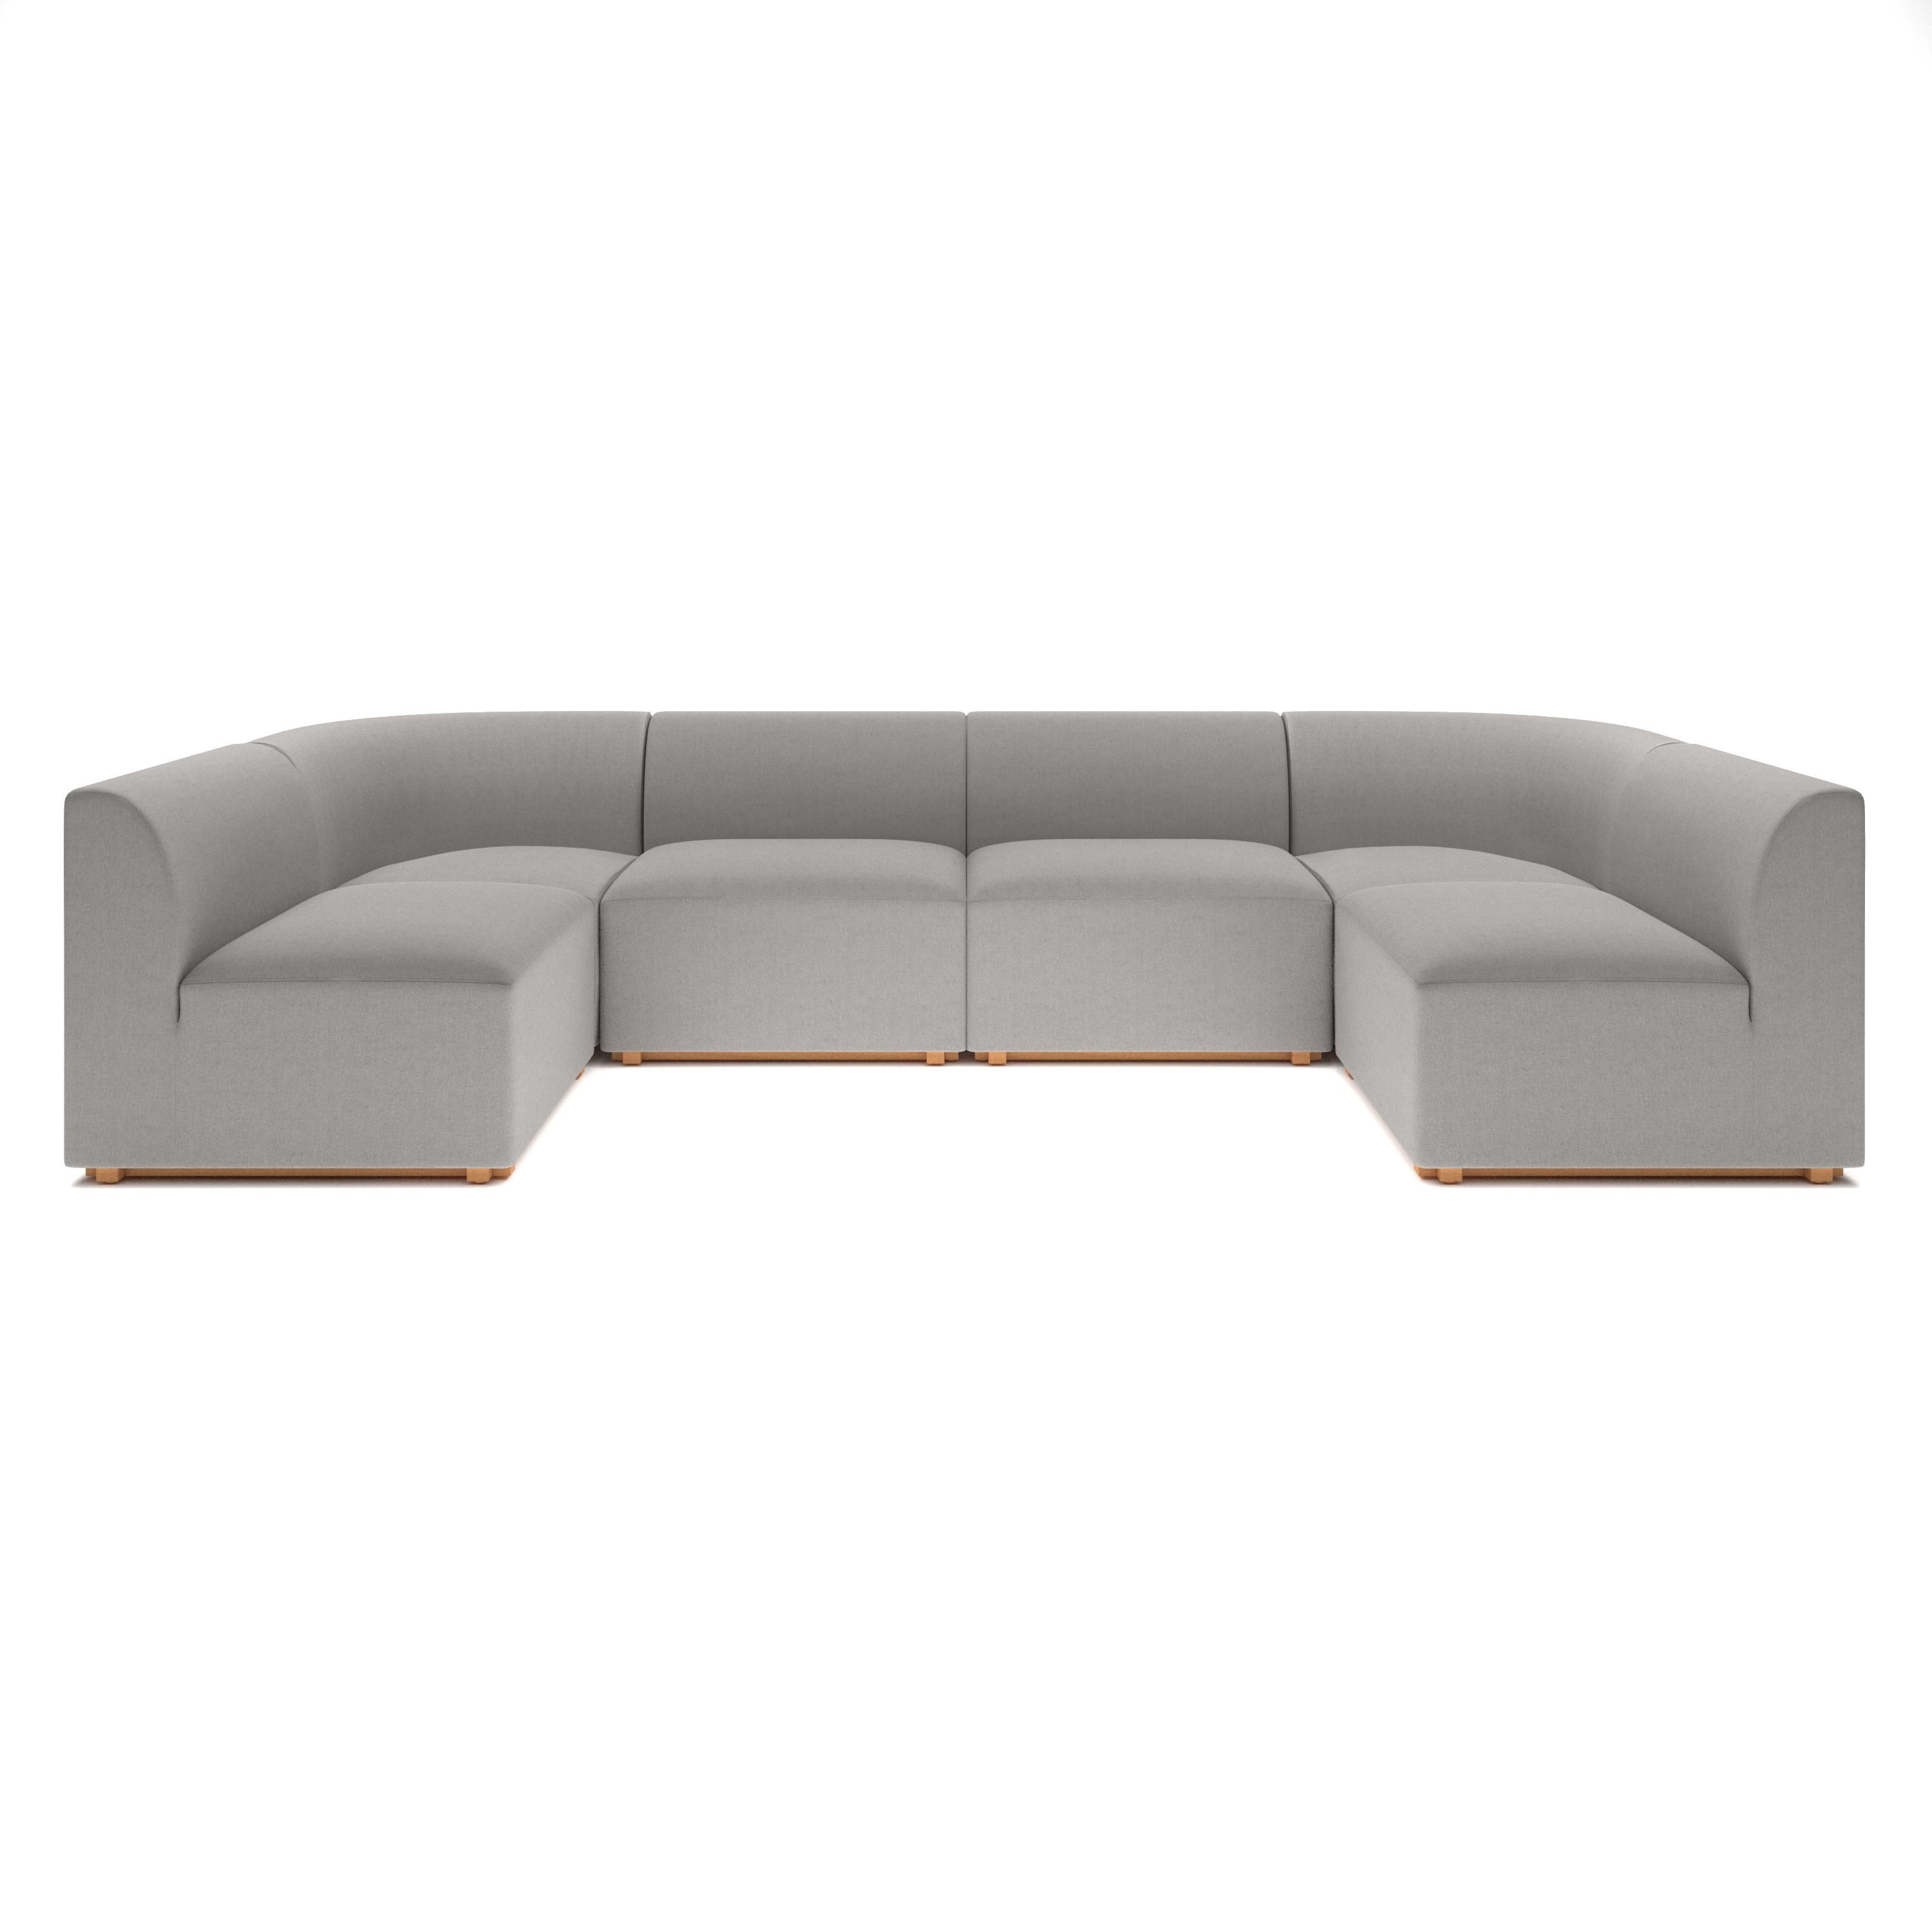 Blockhouse Modular Sectional – 6 Seat U Shaped Sofa | Rypen Collections |  Rypen With 6 Seater Modular Sectional Sofas (Photo 11 of 15)